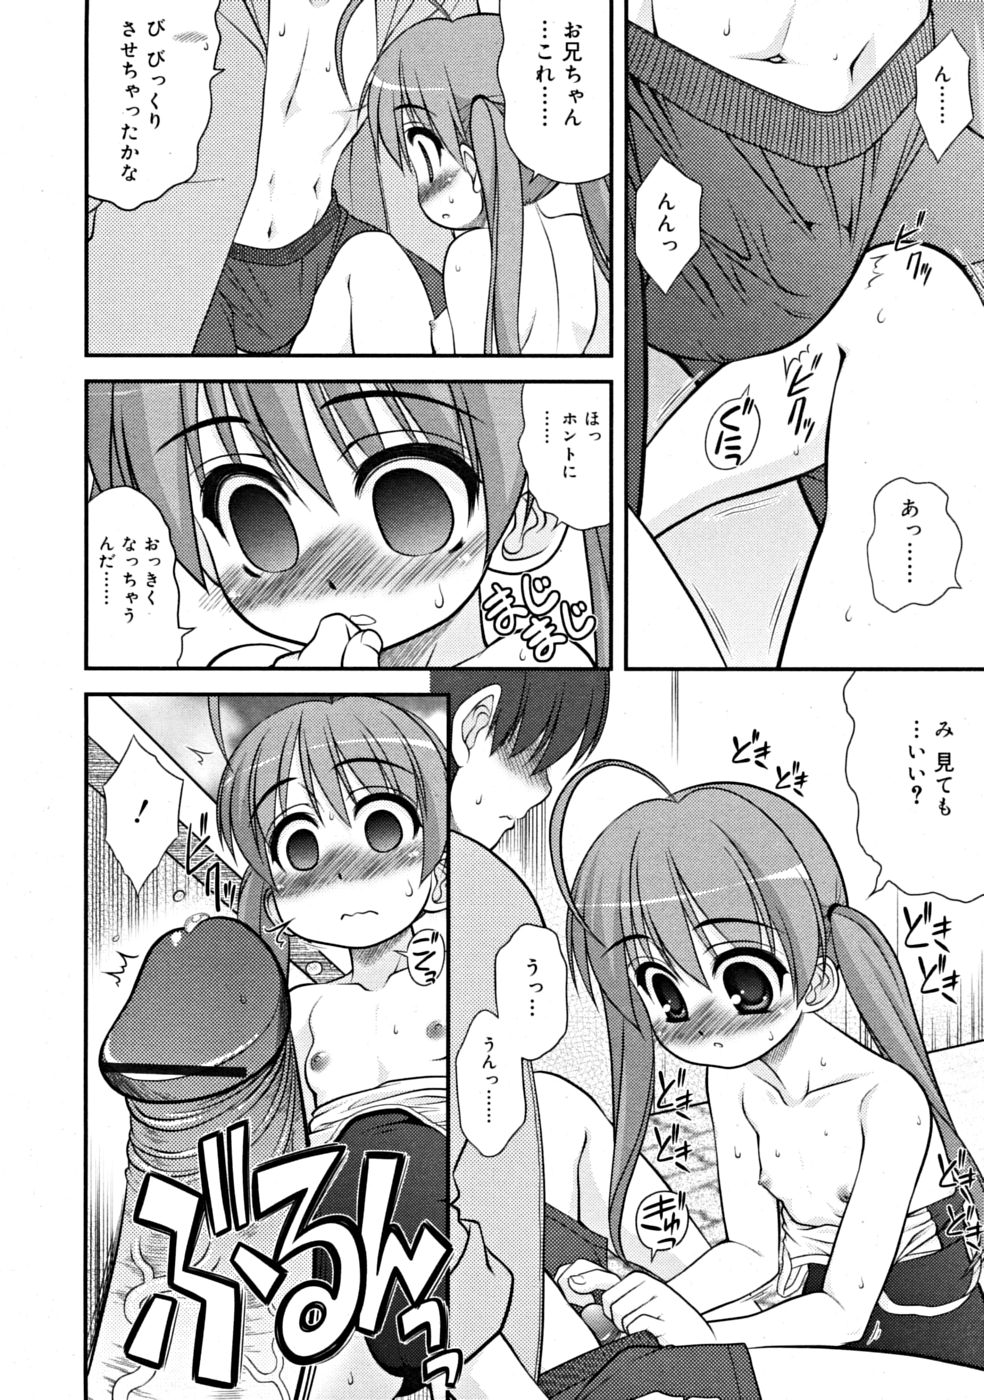 COMIC RiN 2008-09 page 34 full